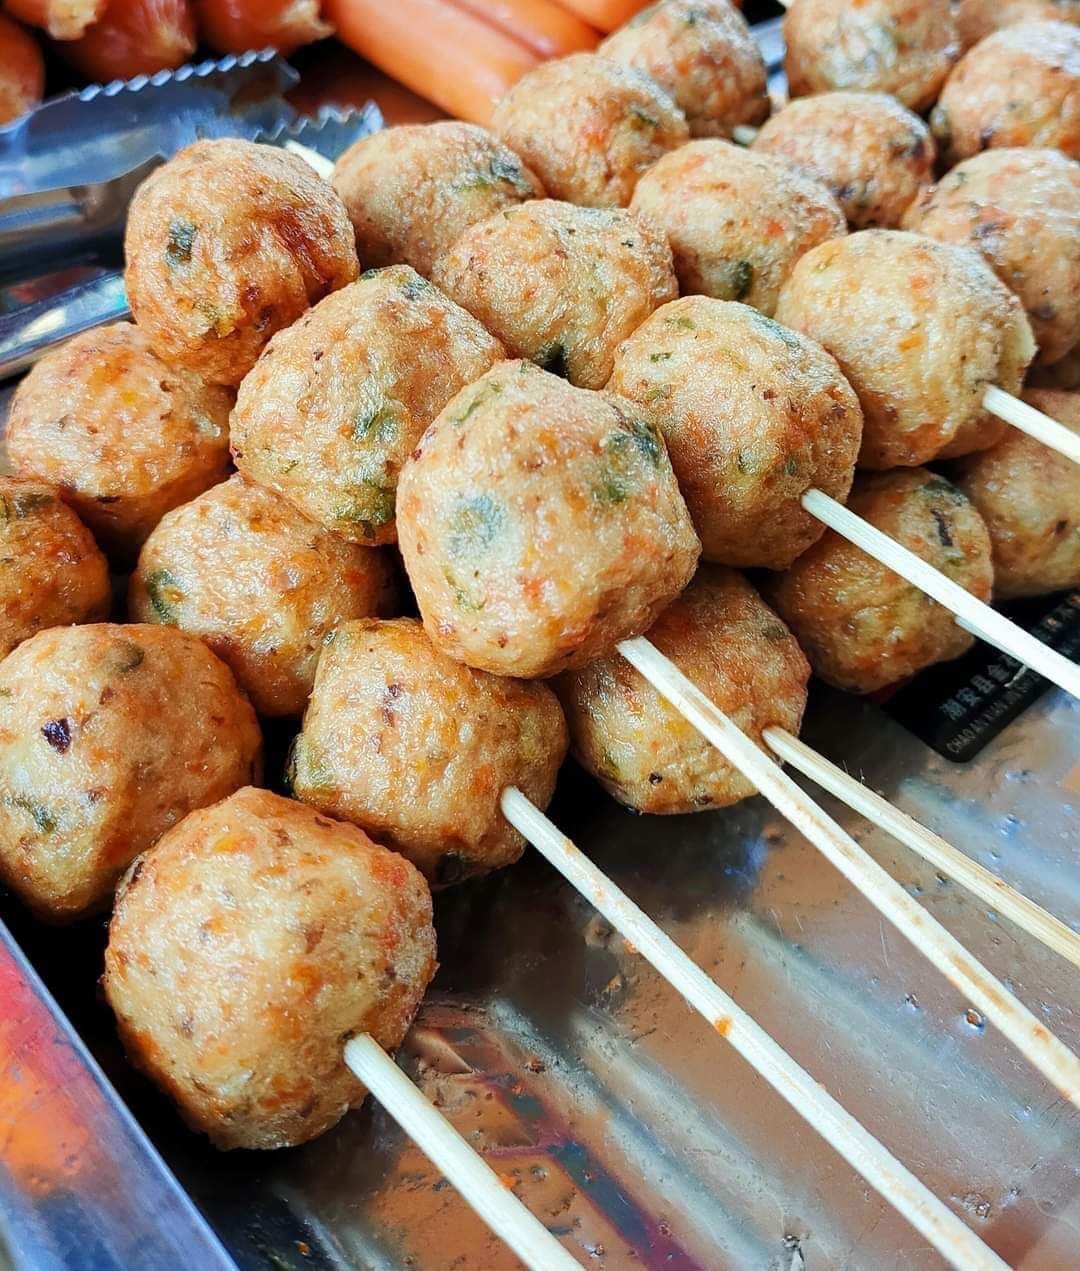 24.Griled fish meatballs (one Stick)